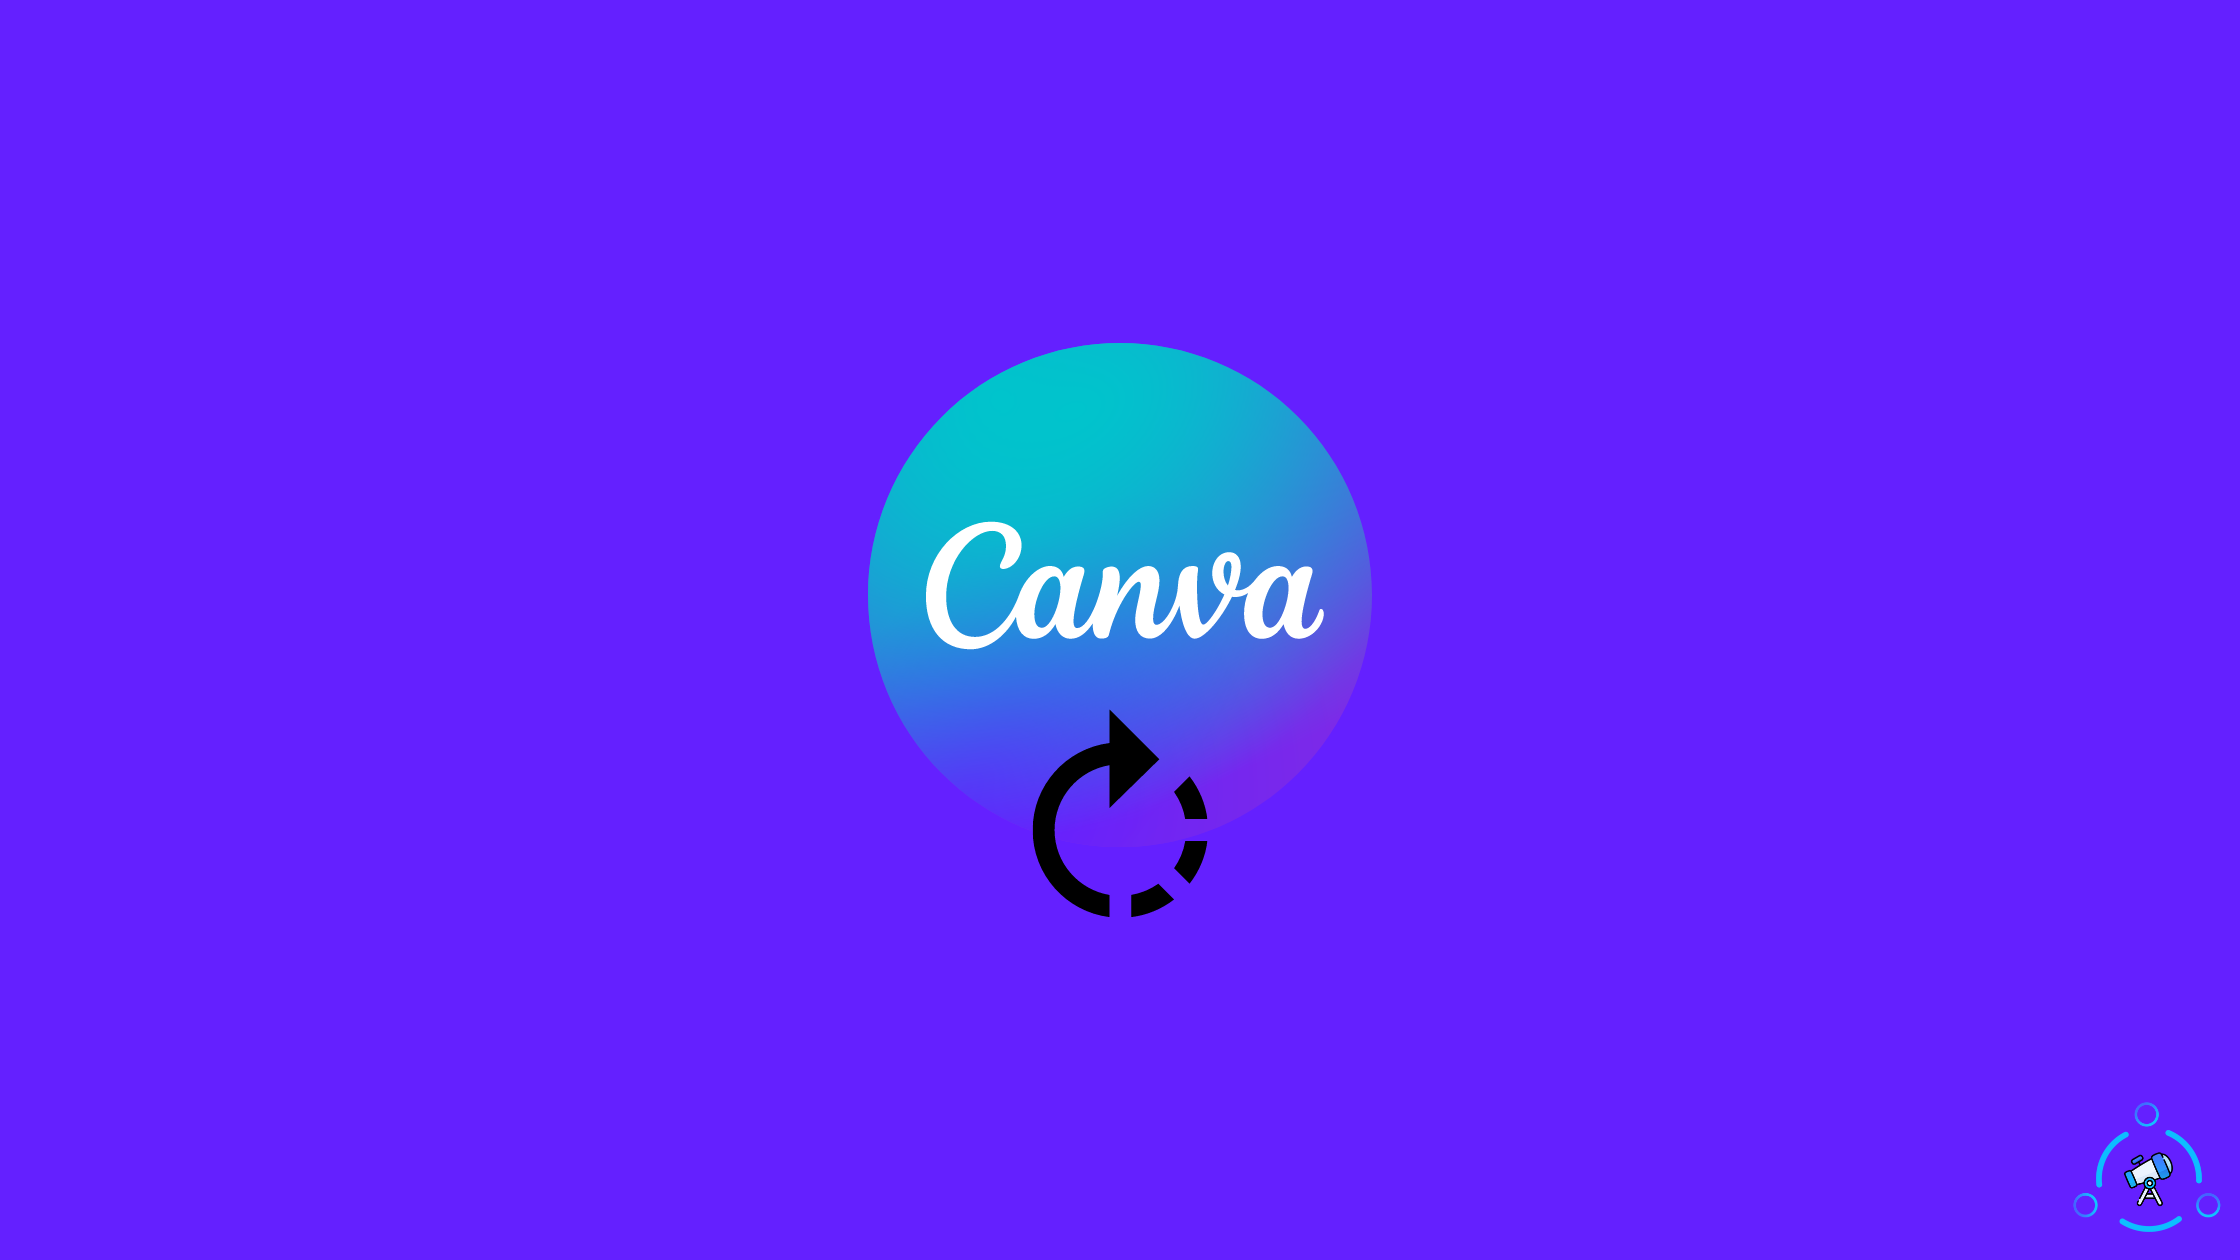 How to Rotate Text in Canva